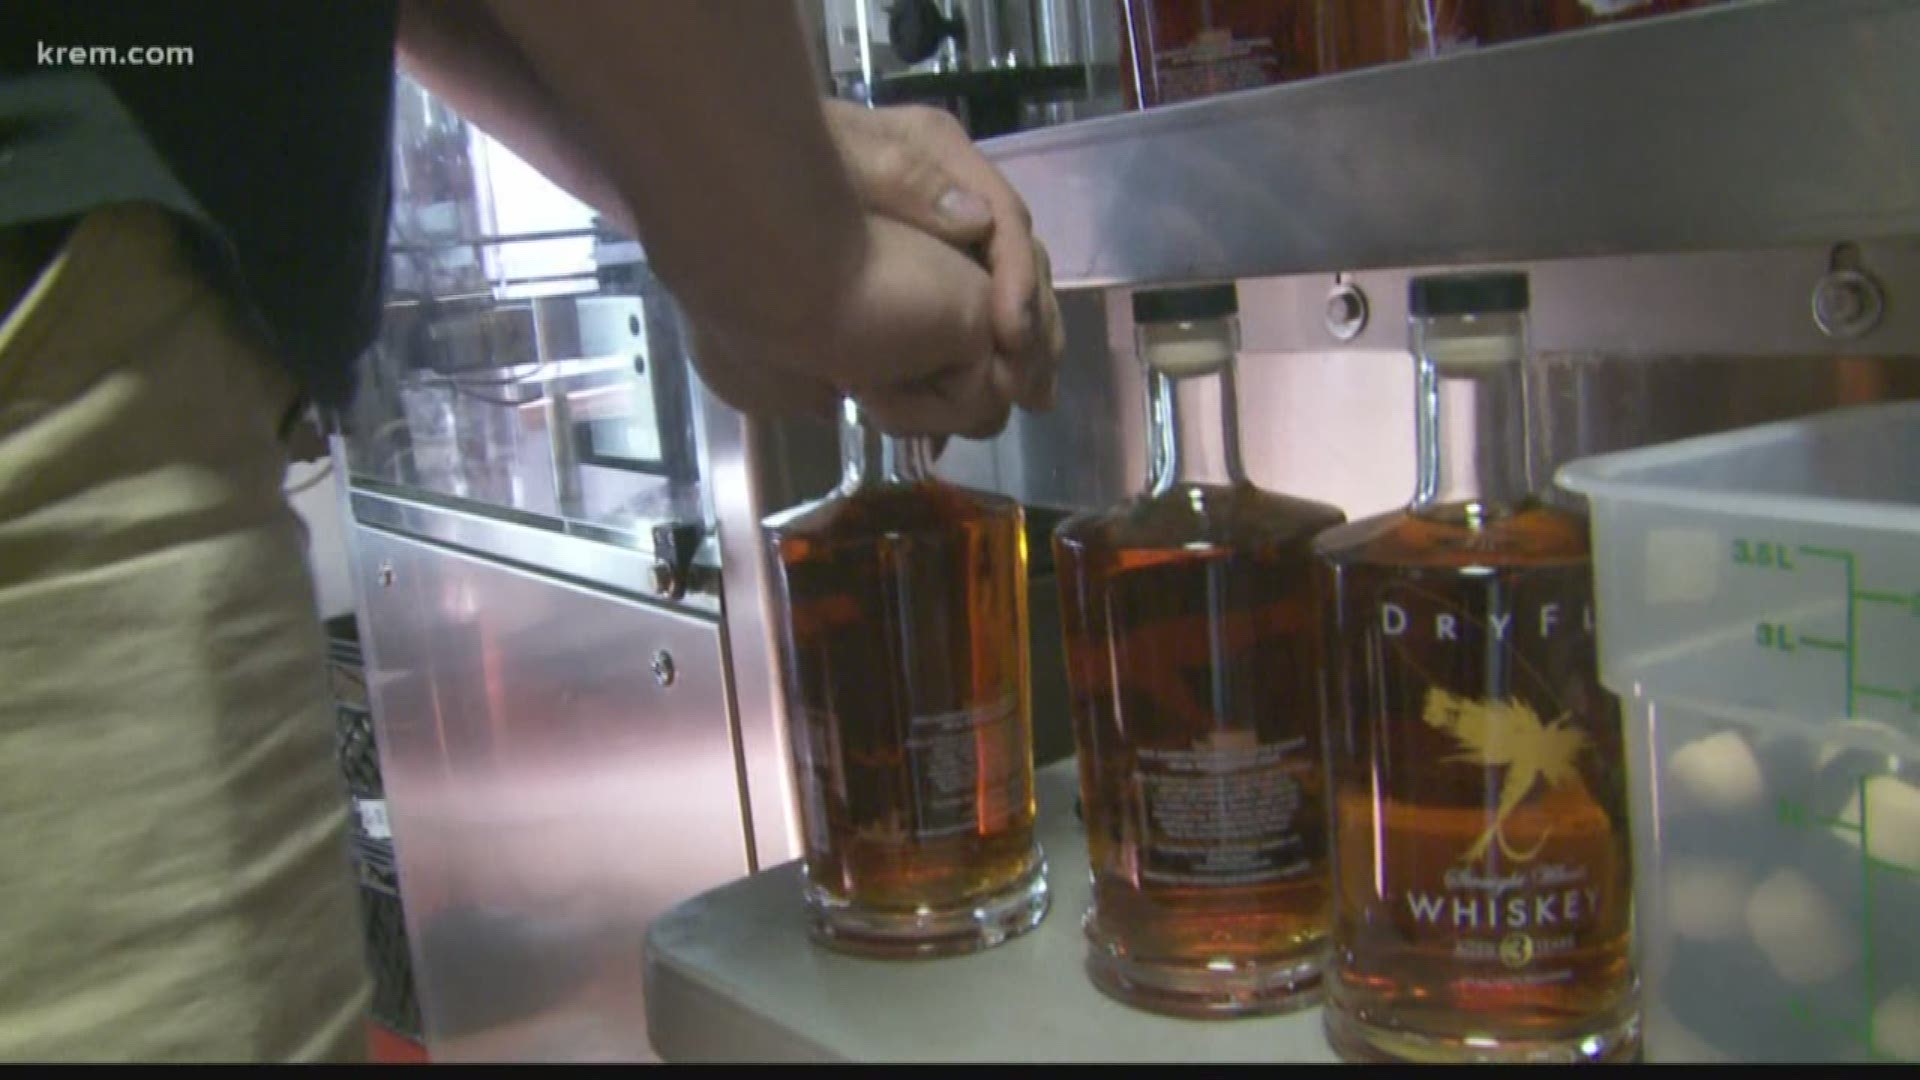 Dry Fly prepares to be hit hard by Canada whiskey tariffs